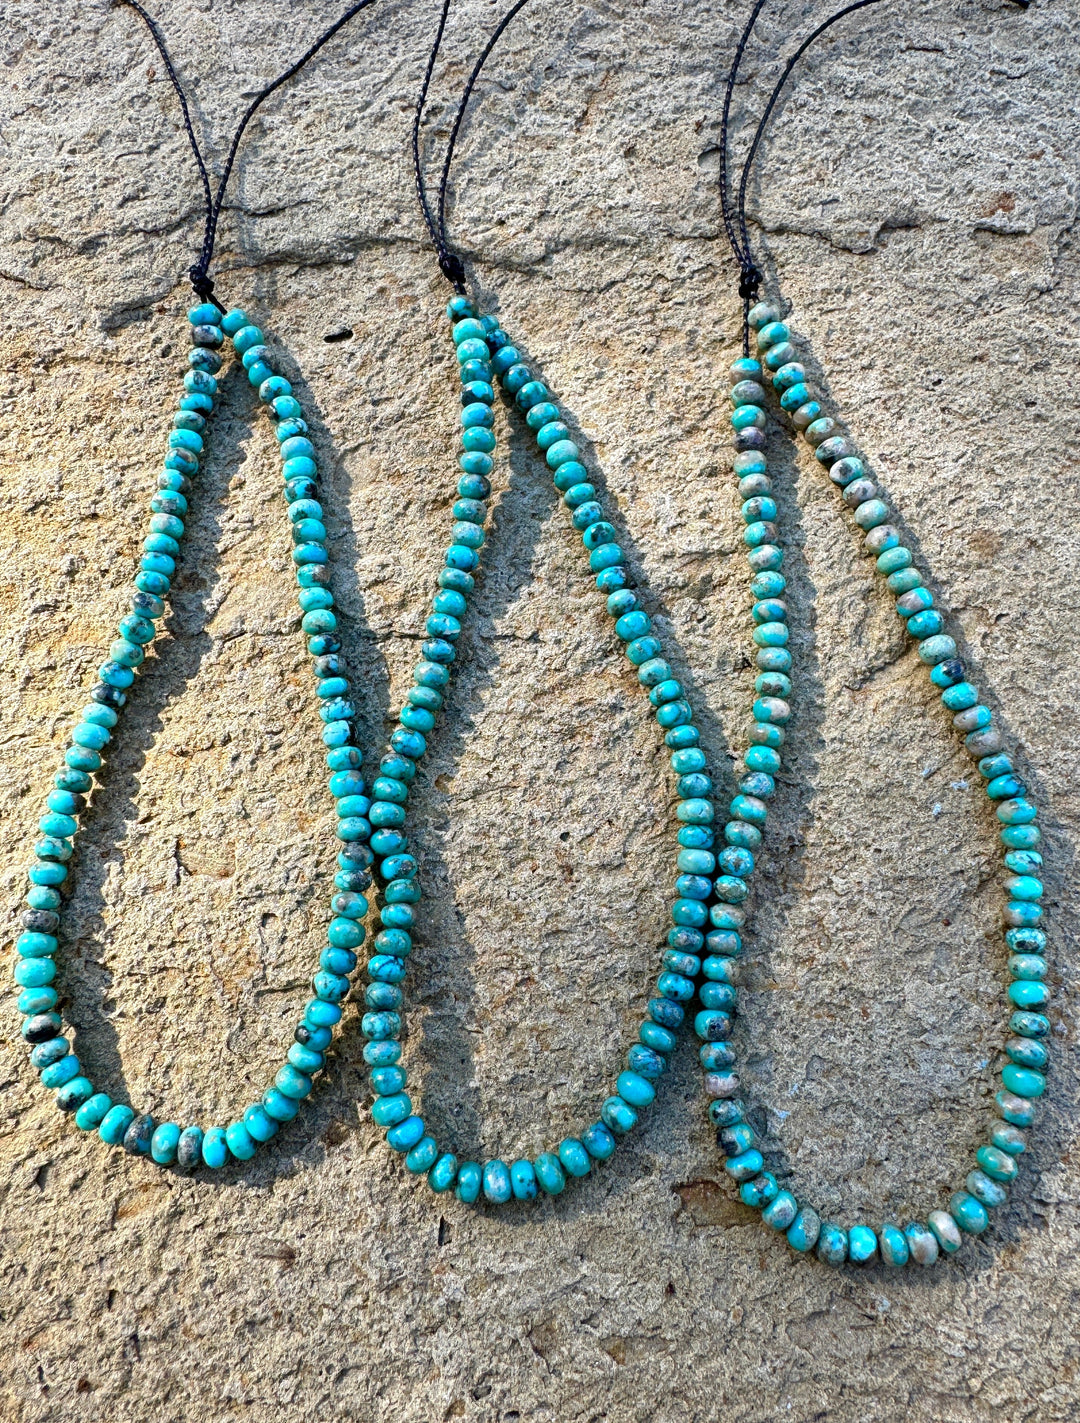 Campitos (Mex) Turquoise 4mm Rondelle Beads (9 inch Strands)